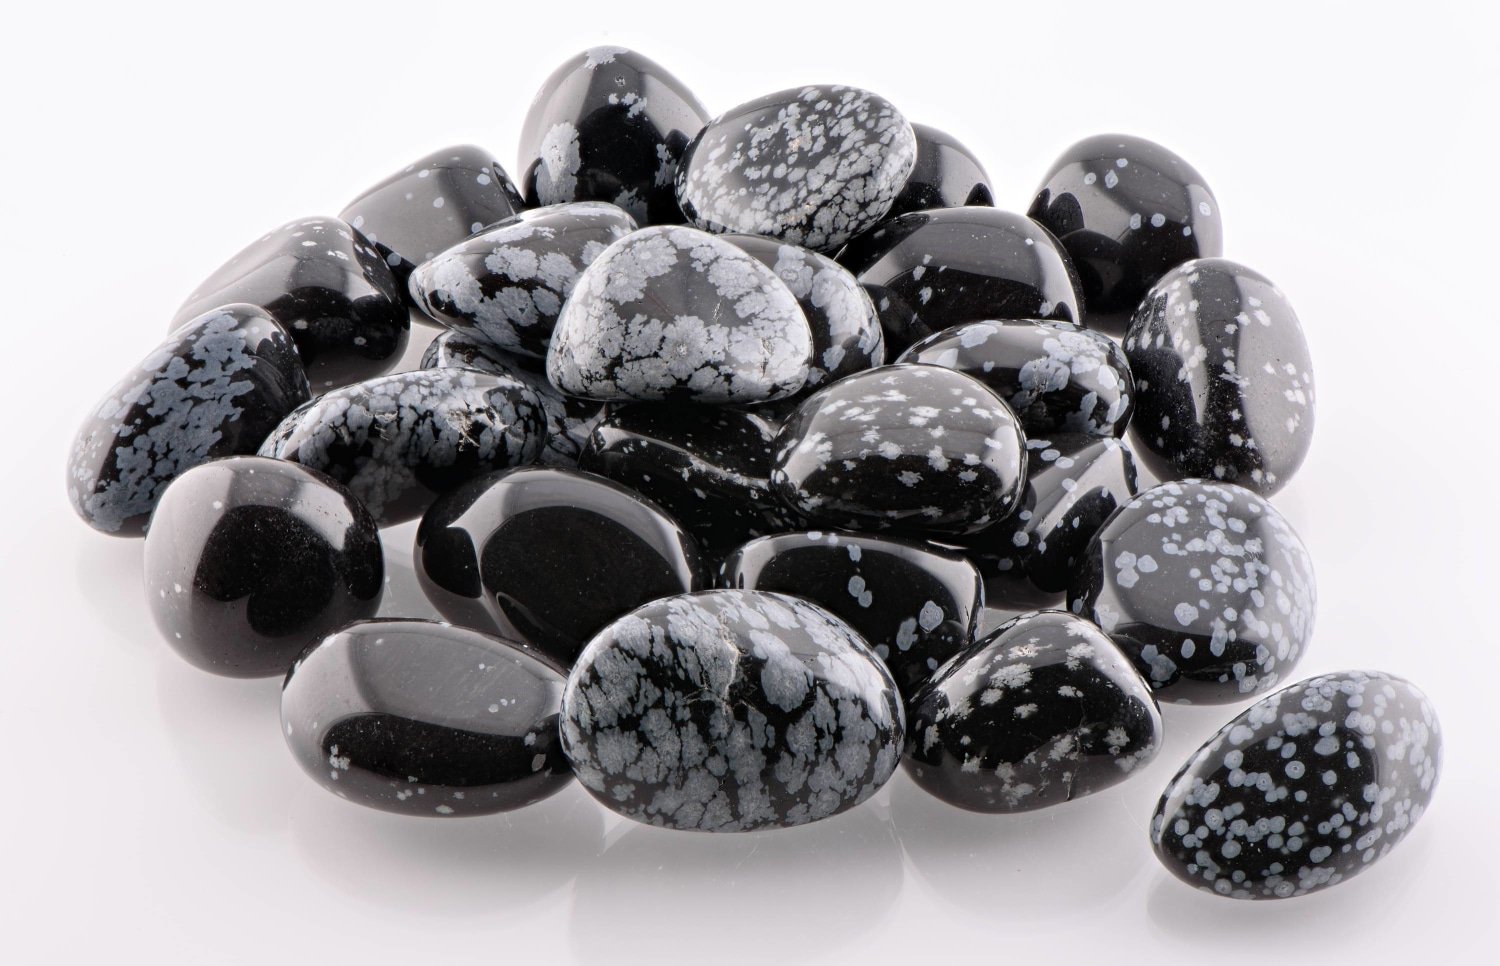 Snowflake Obsidian Meanings, Properties and Uses